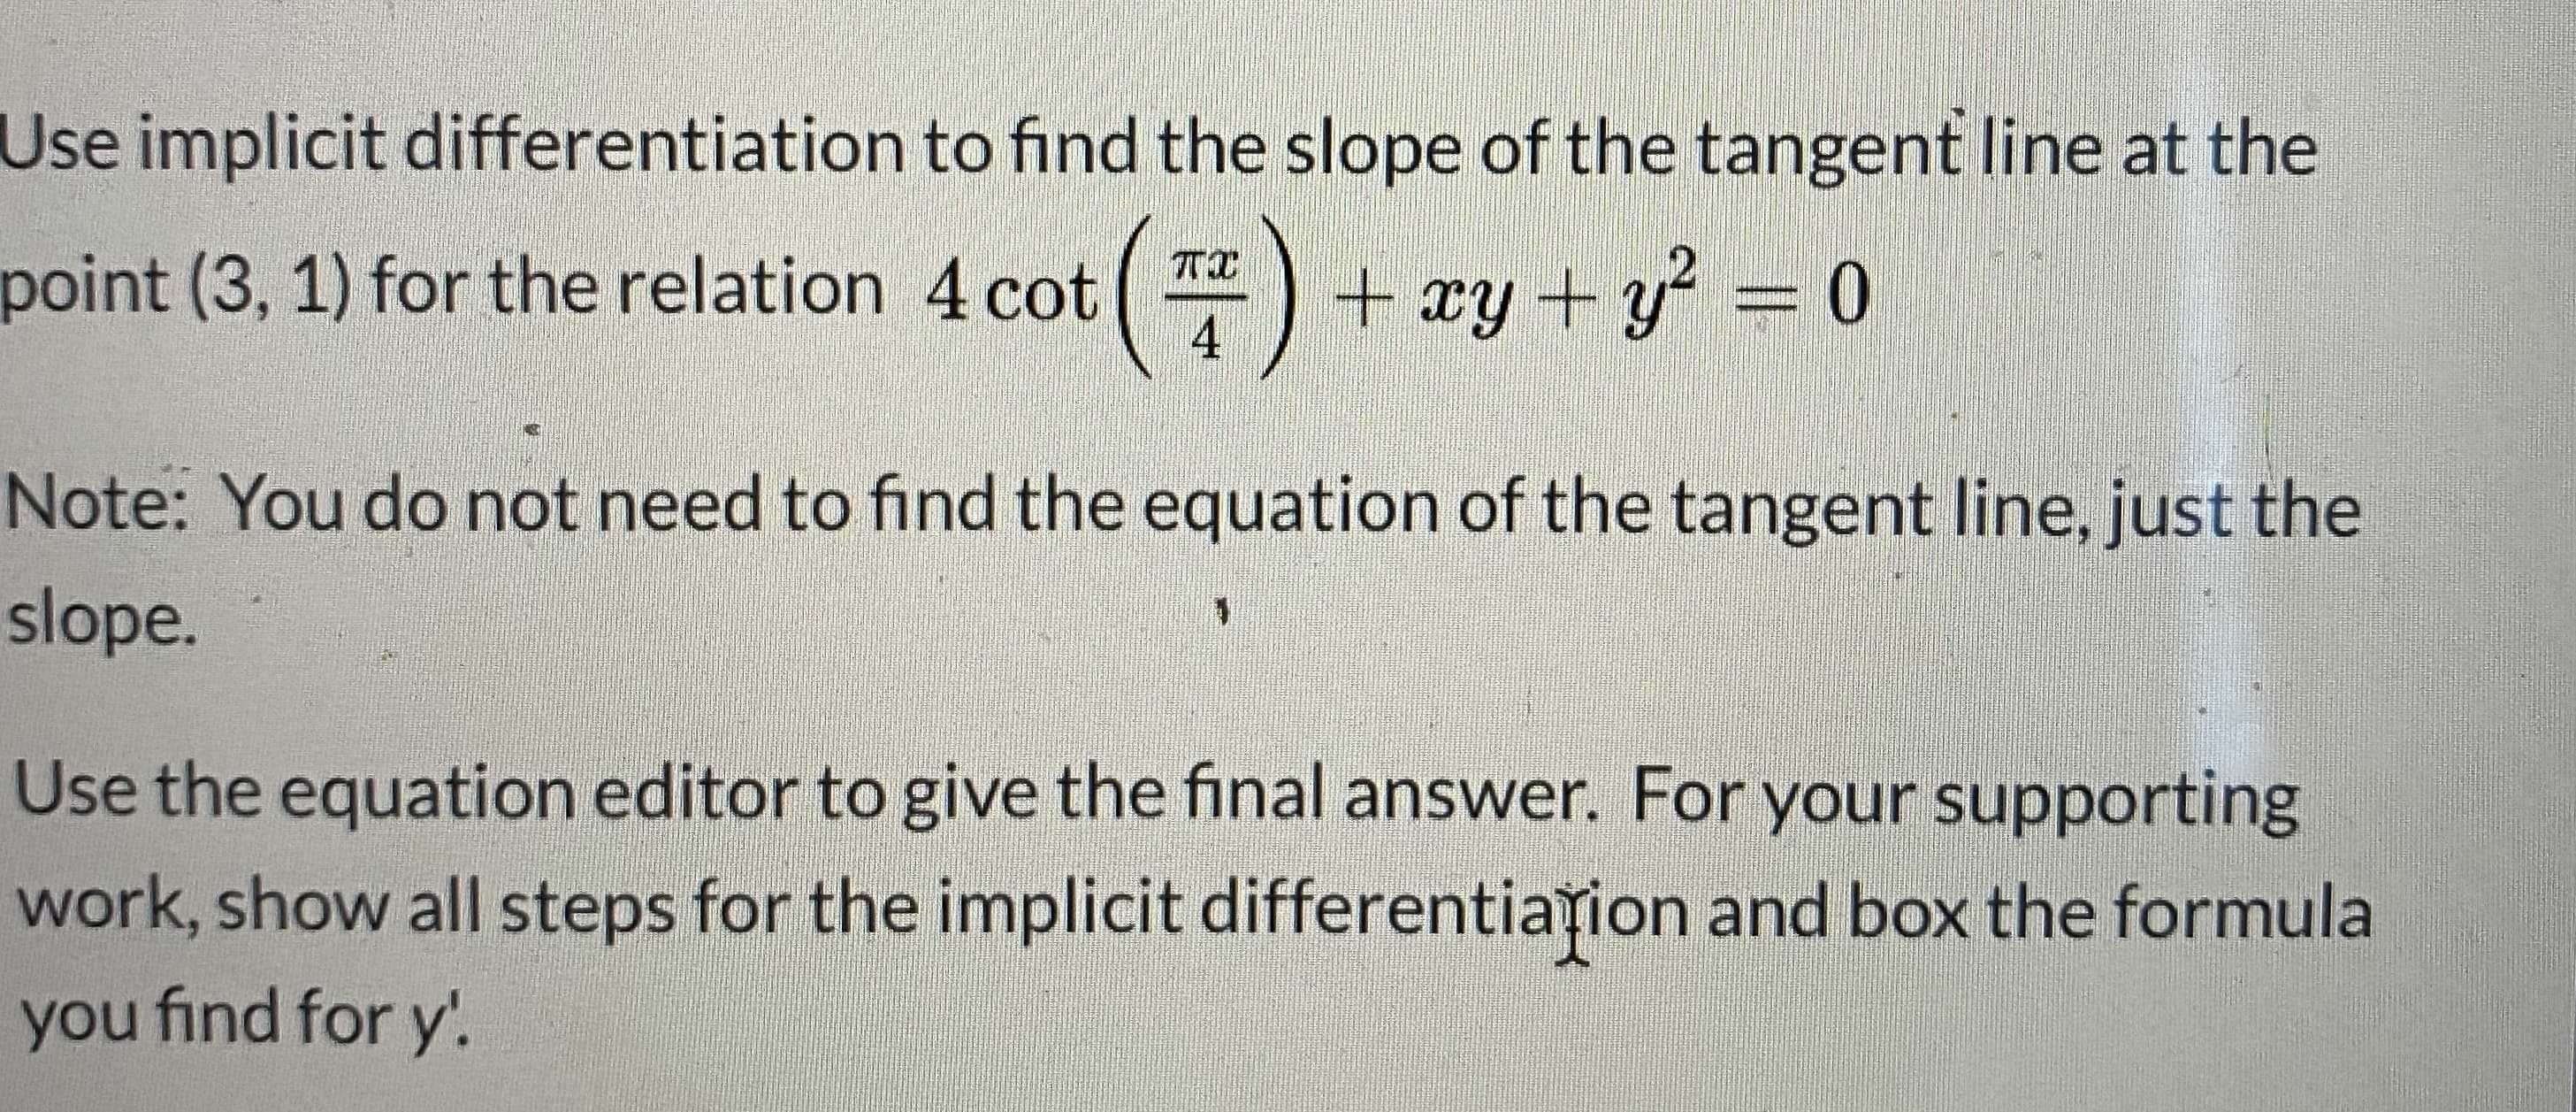 Jse implicit differentiation to find the slope of the tangent line at the
point (3, 1) for the relation 4 cot
+ xy + y' = 0
